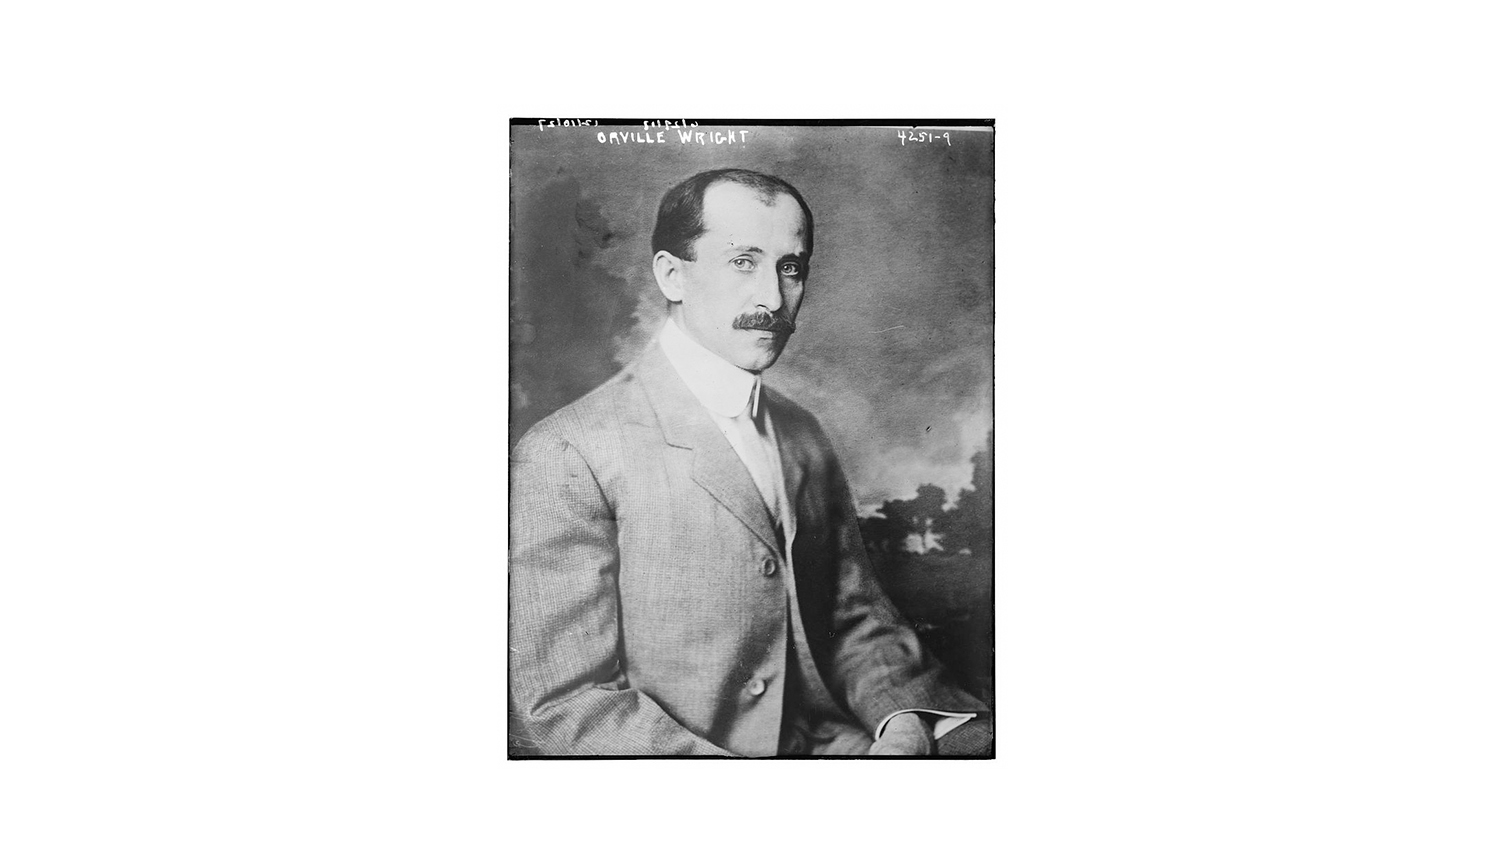 Historical photo of Orville Wright